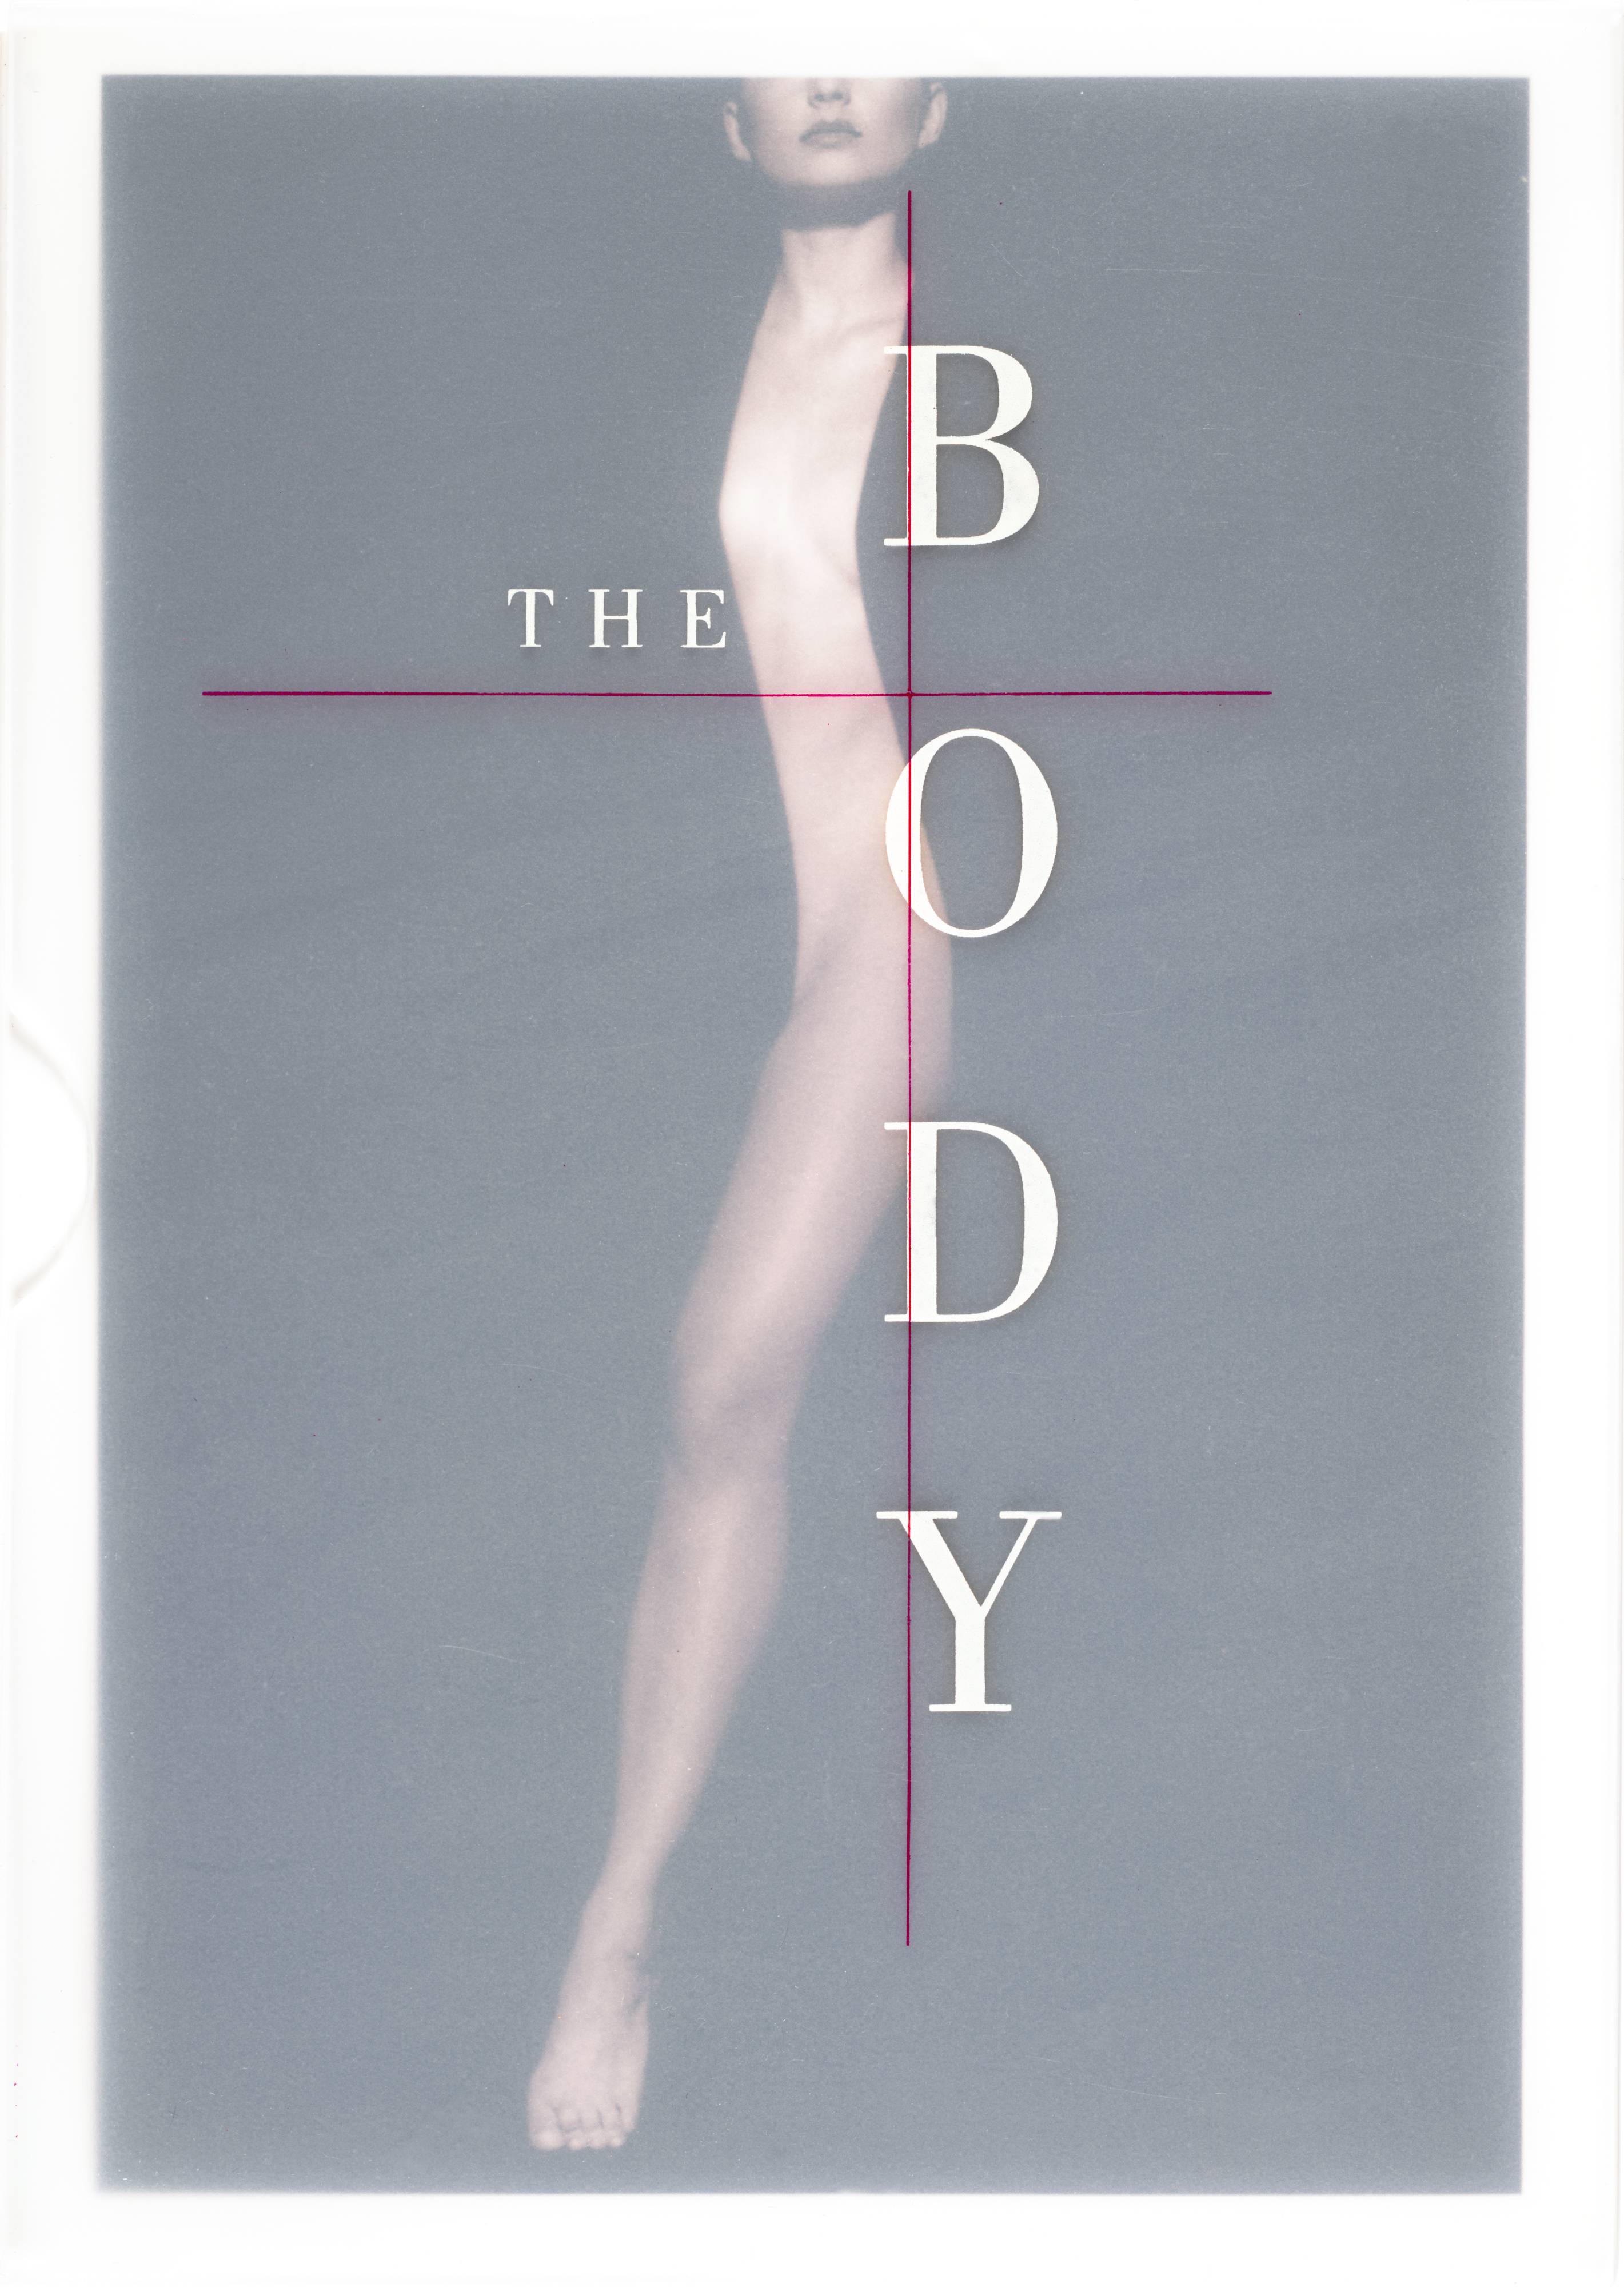 The Body: Photographs of the Human Form